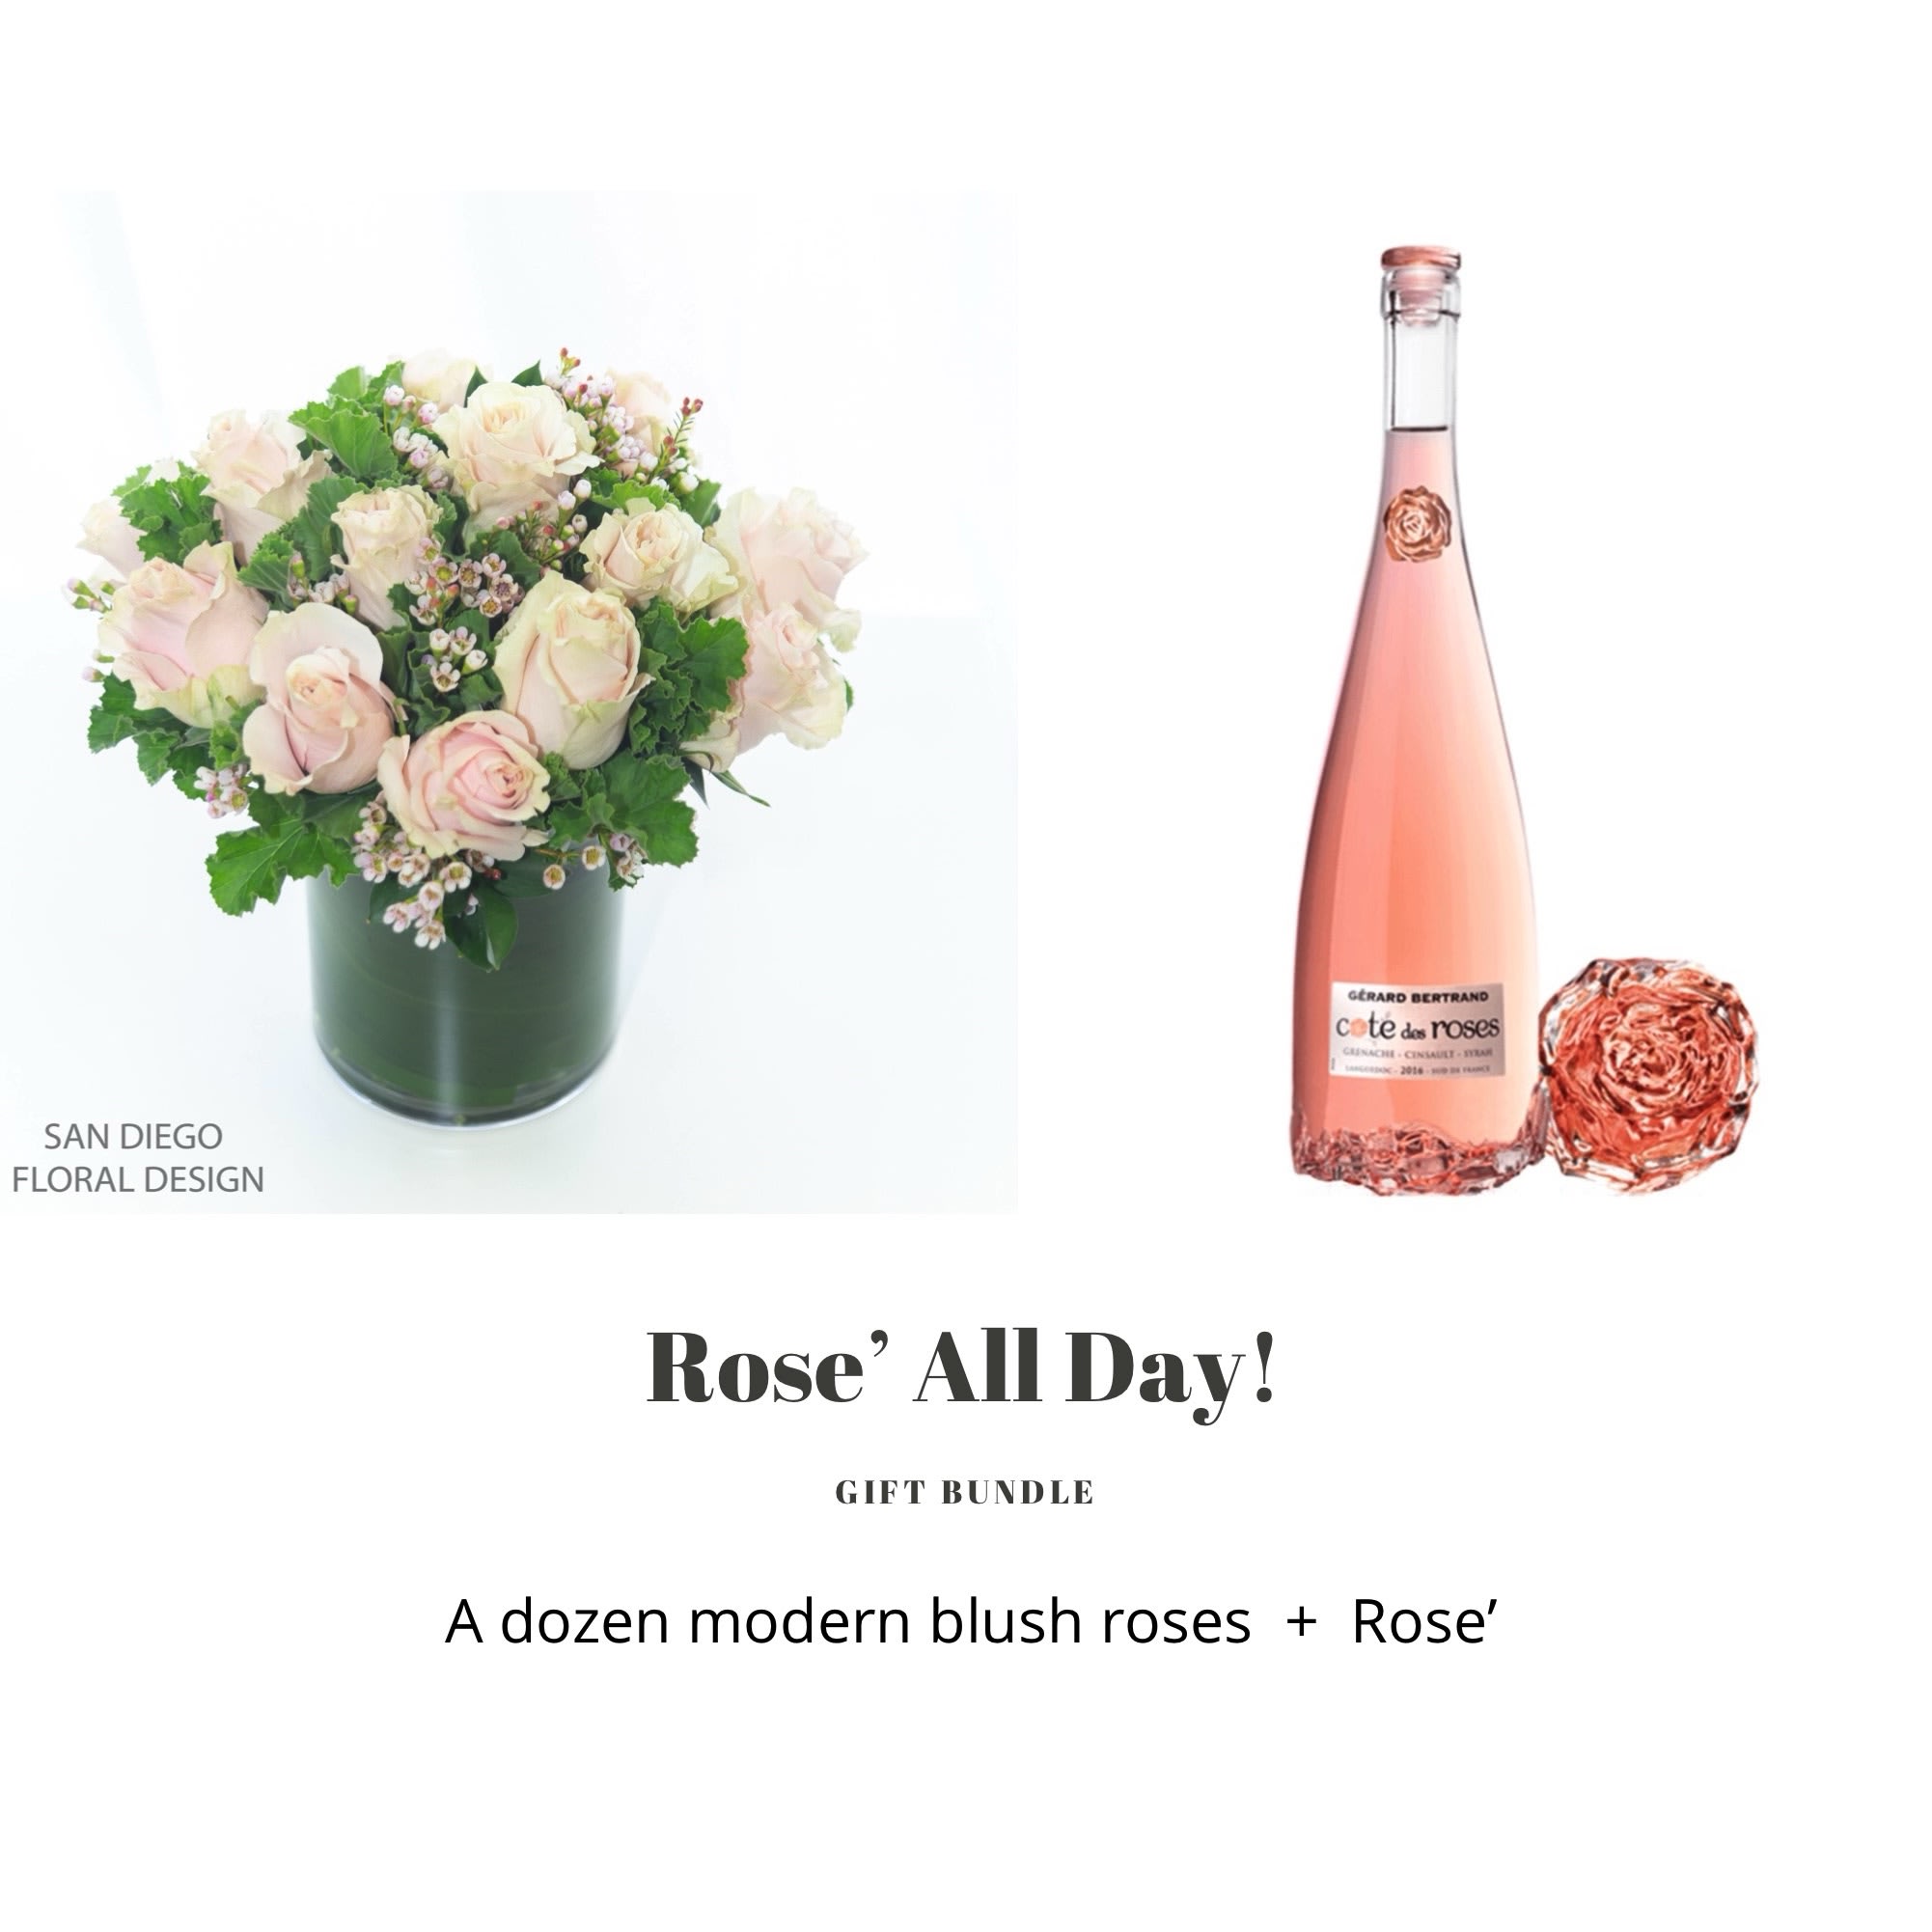 Rose' All Day Pairing  - A dozen...or two modern blush roses accompanied by a delicious bottle of Cote' Des Roses Rose' 